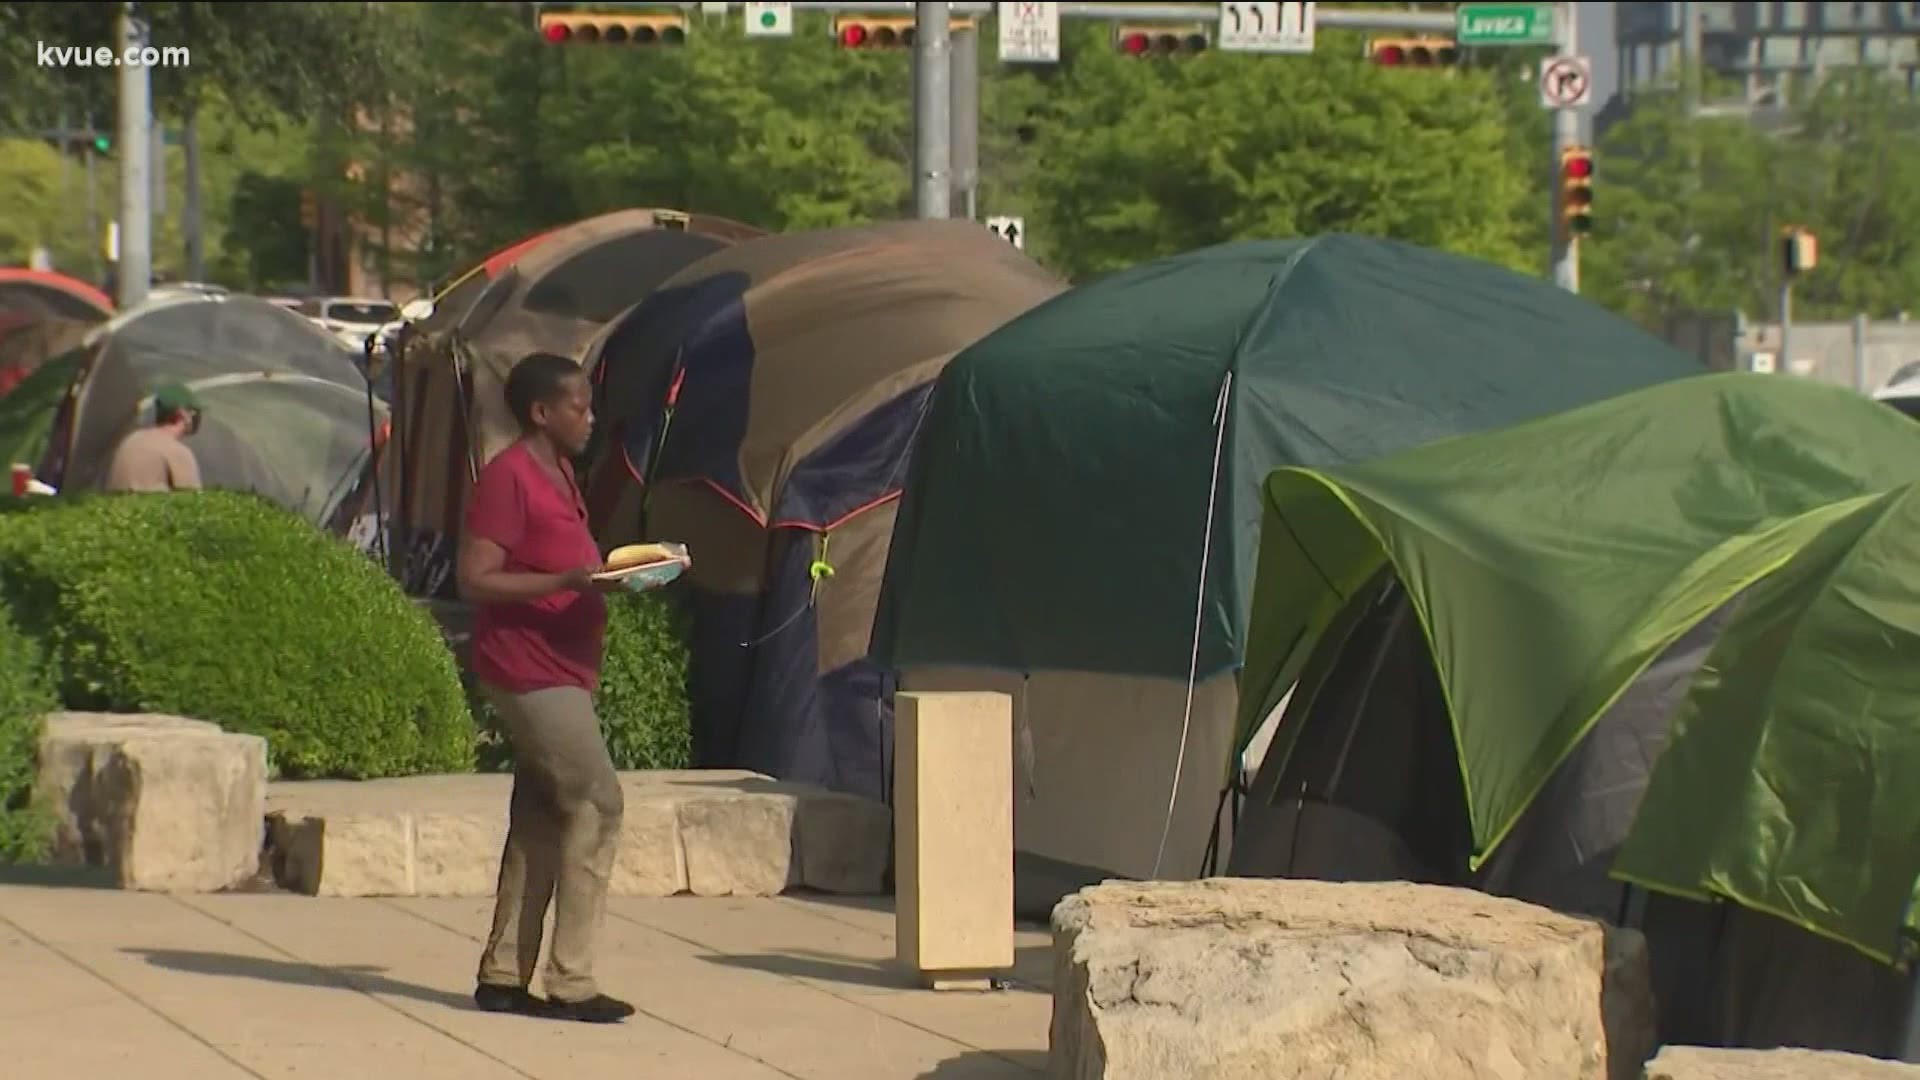 Options the city is considering include a public campground and bridge shelters for people experiencing homelessness.